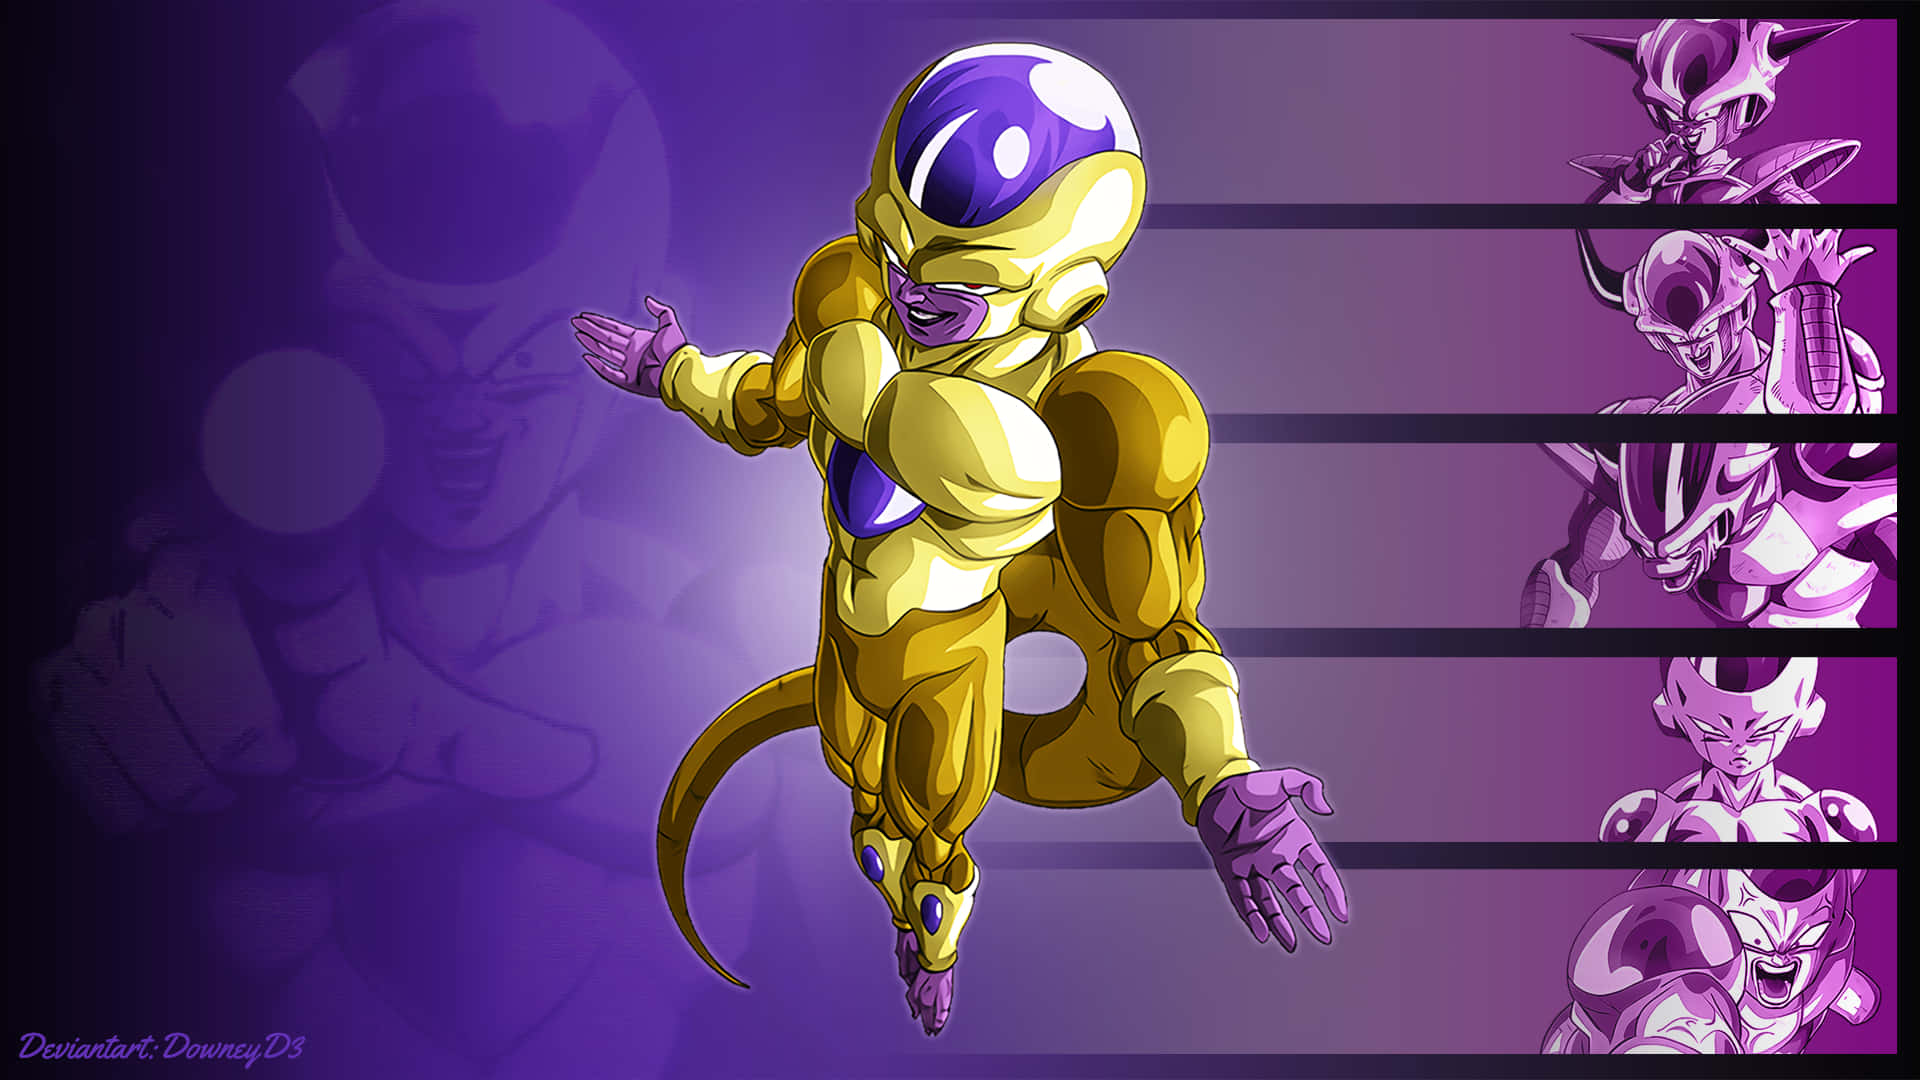 Download Frieza The Ruthless Villain From The Dragon Ball Universe  Wallpaper  Wallpaperscom